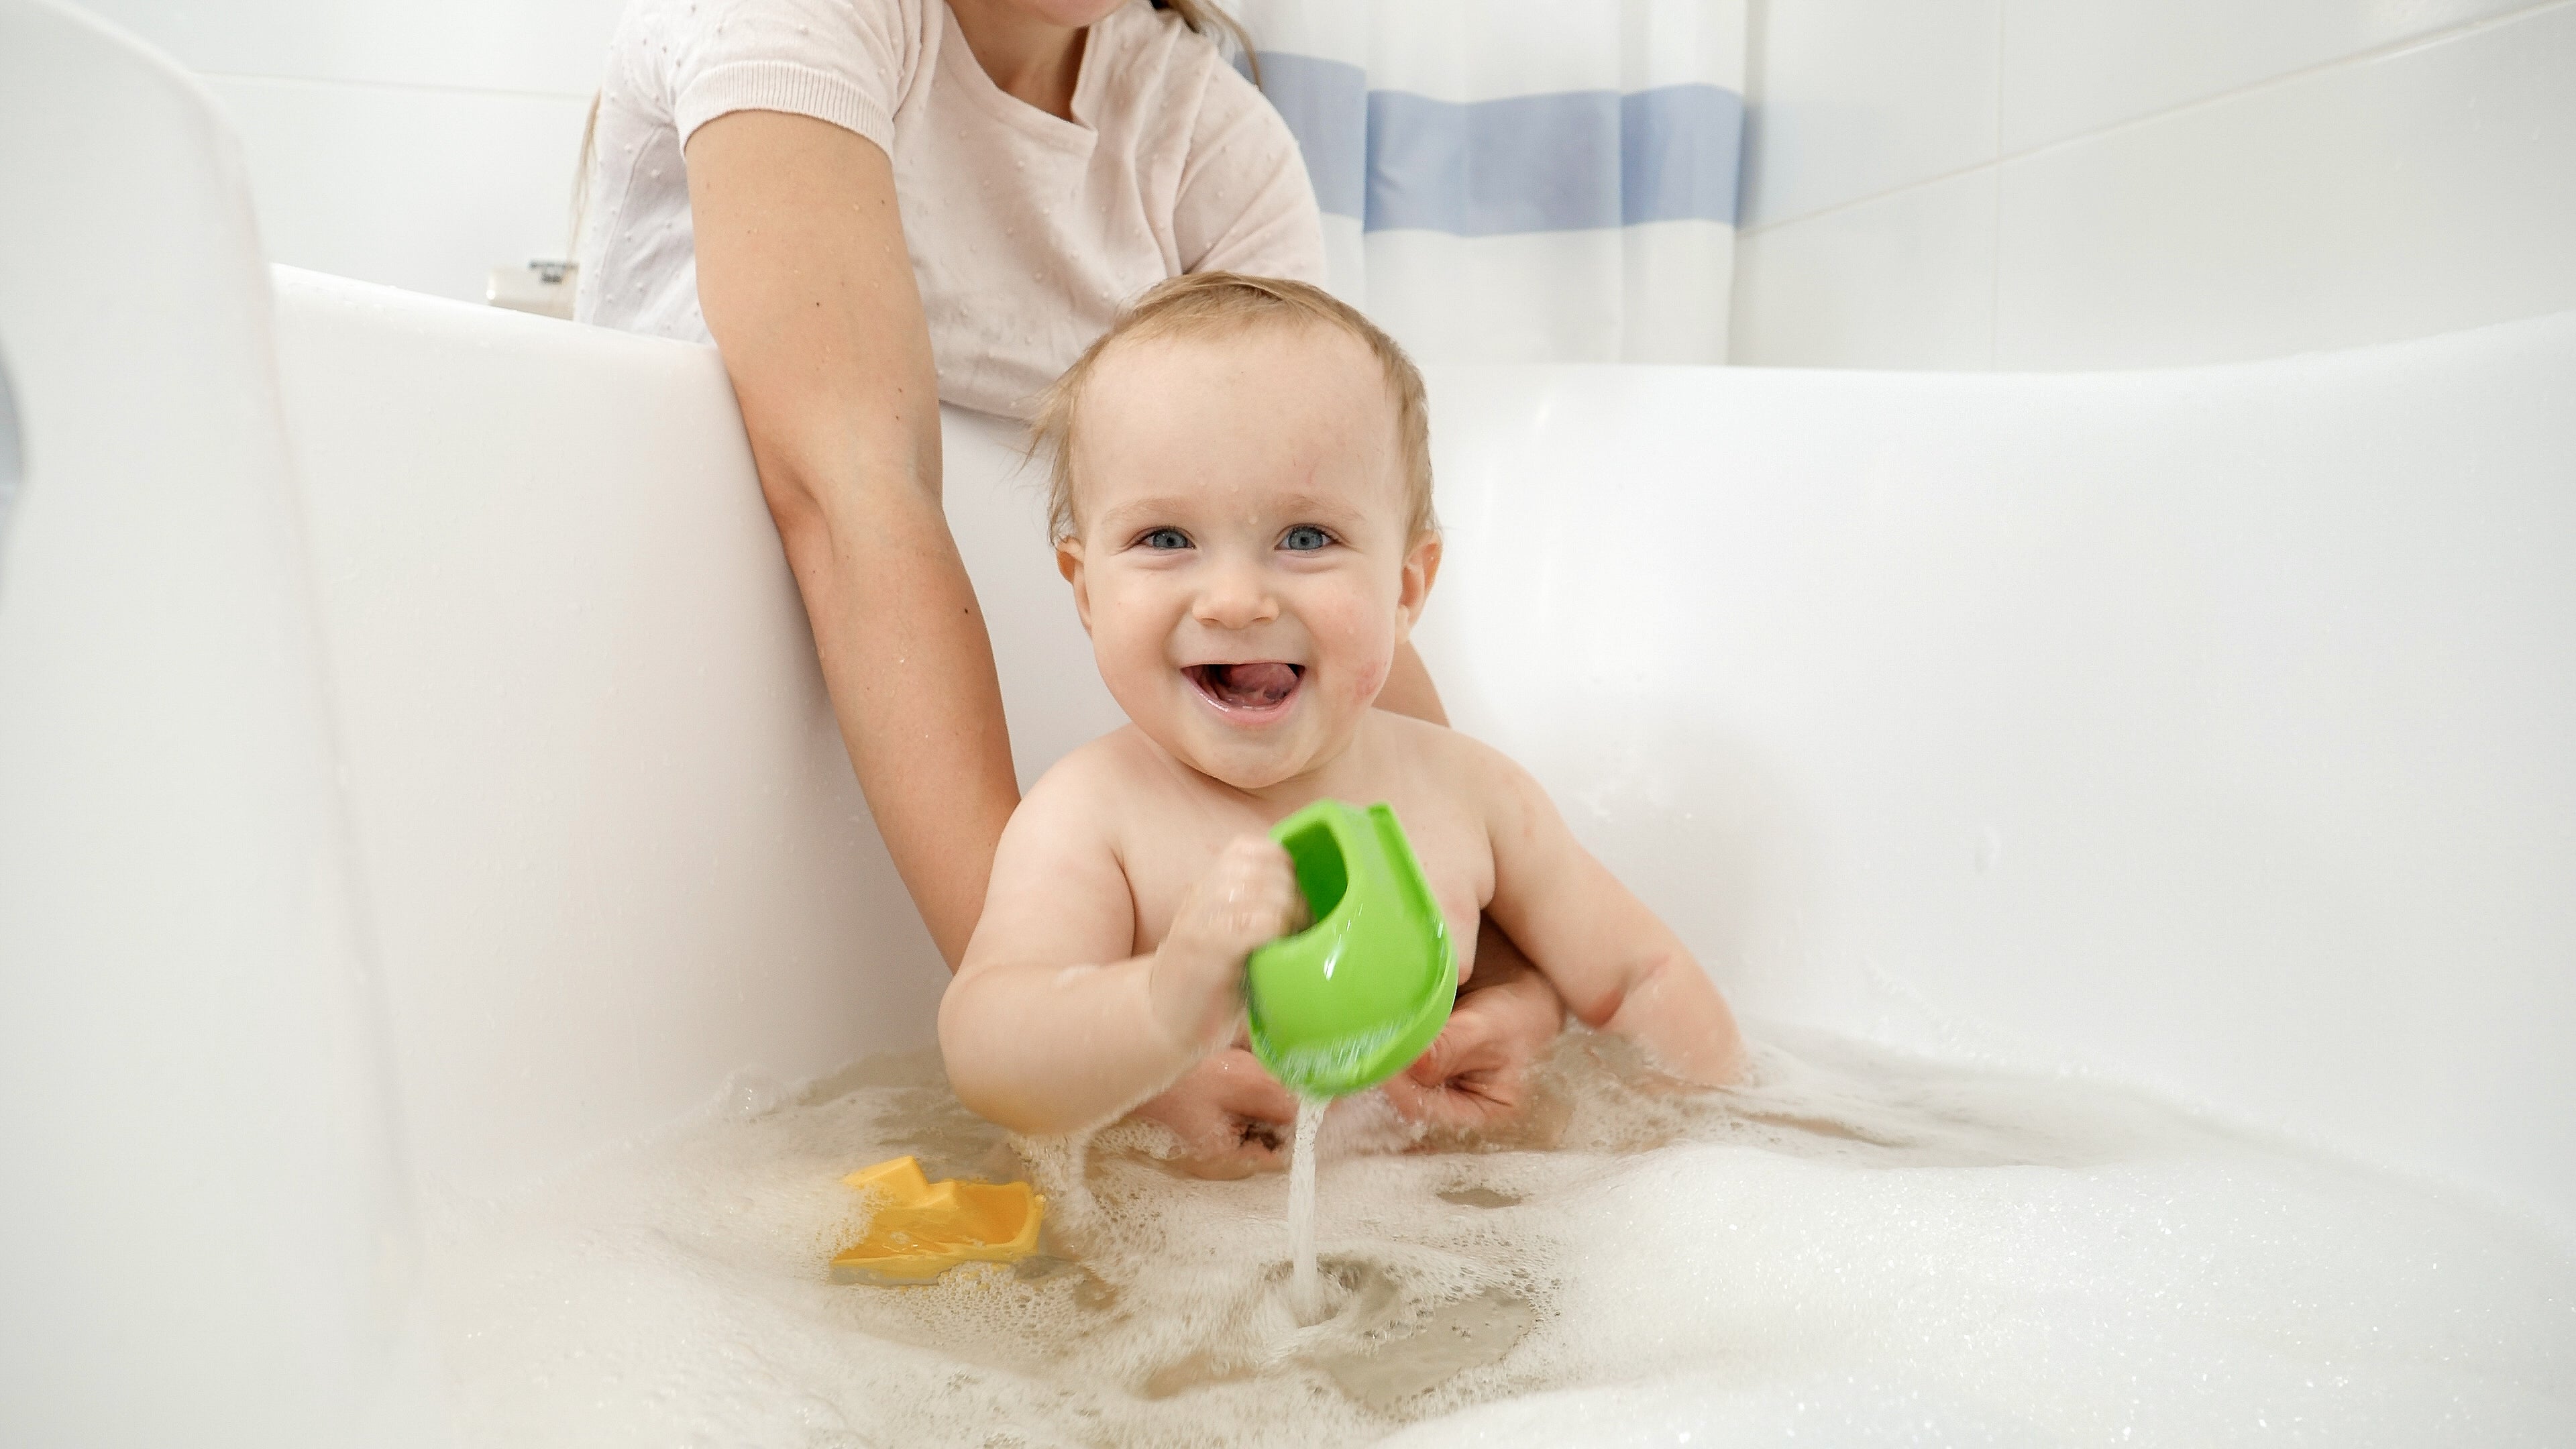 A toddler in a bathtub playing with bath toys and bubbles. Mother's arm is visible in the background.